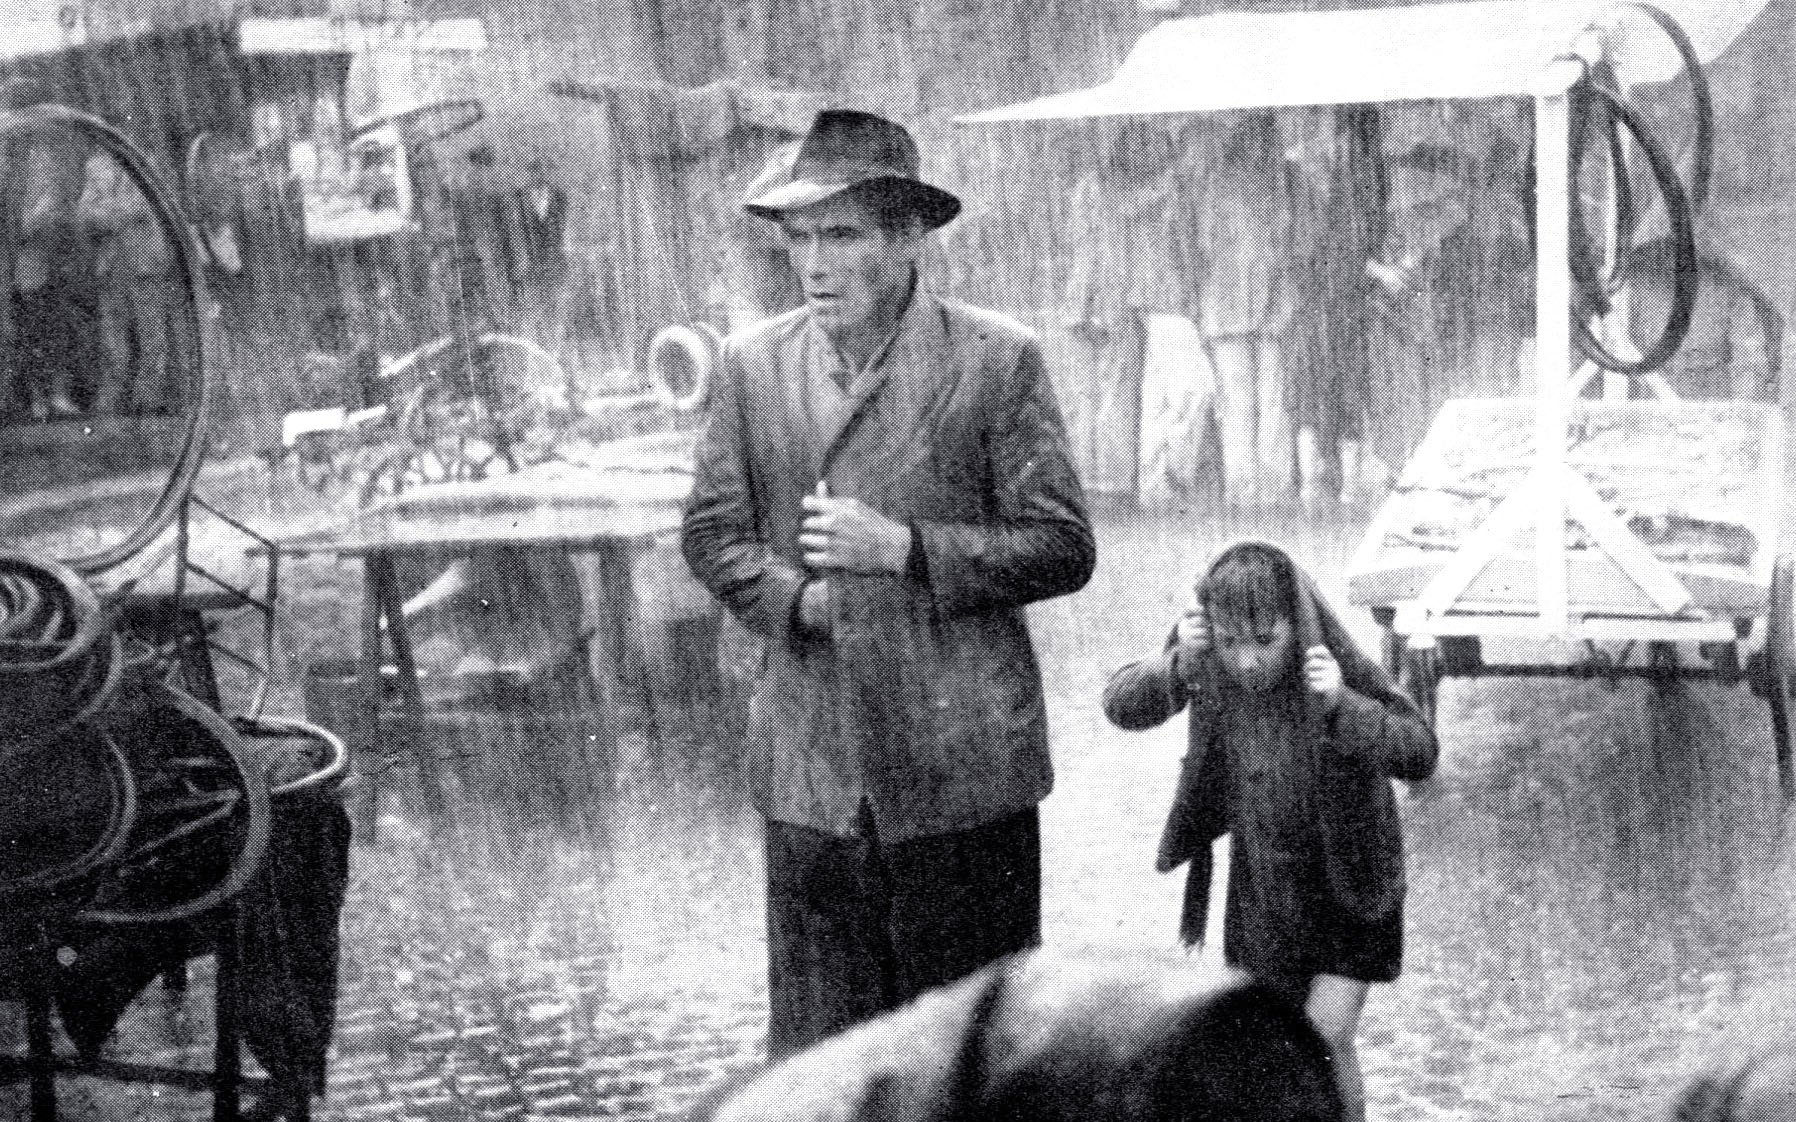 Lamberto Maggiorani and Enzo Staiola in a scene from "Bicycle Thieves" (De Sica, 1948)